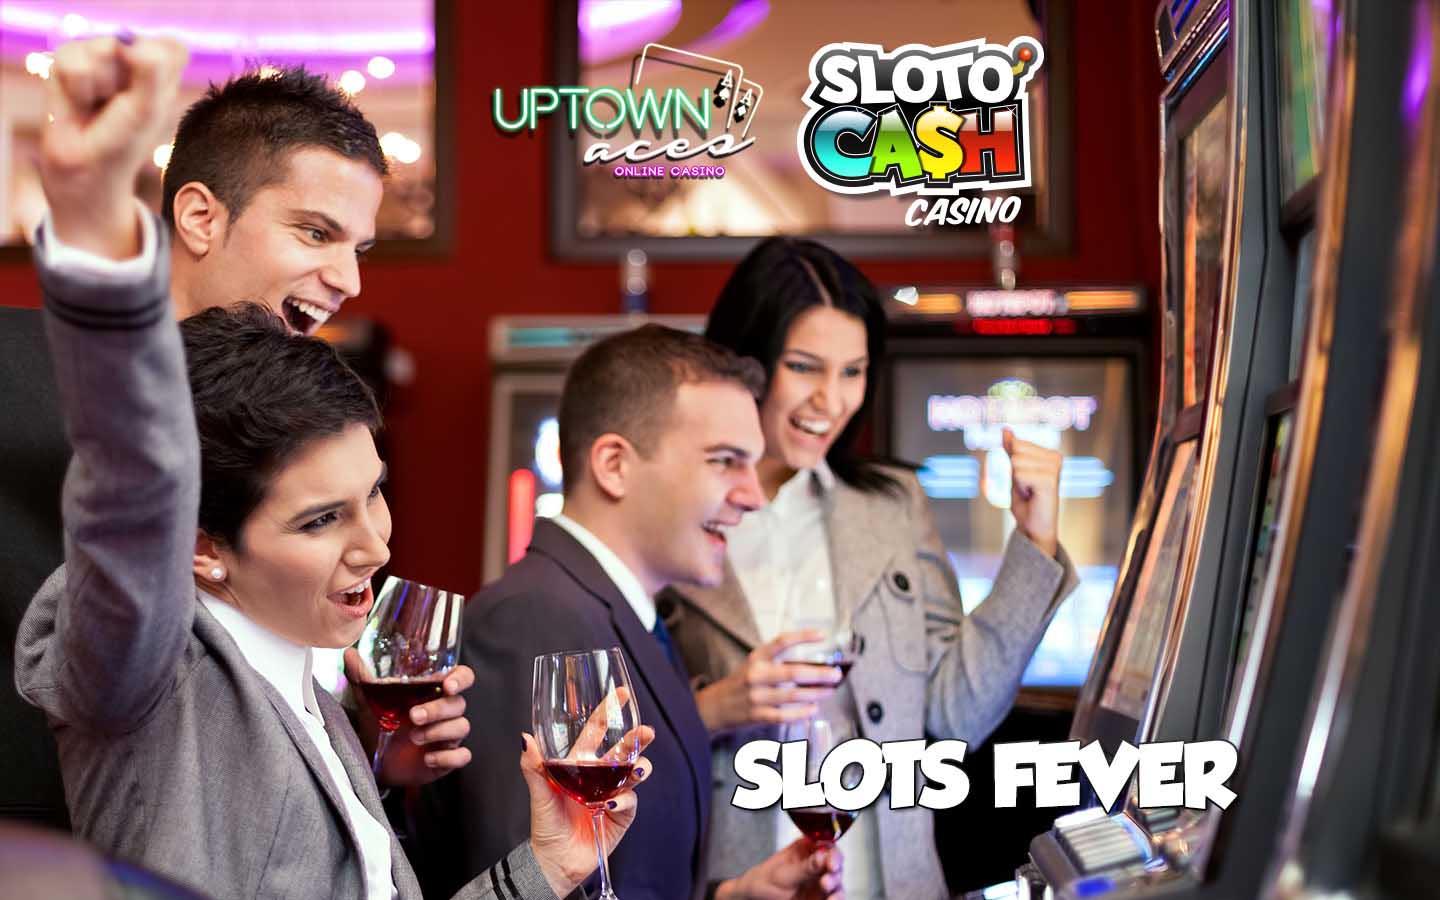 Slots Fever at Sloto'Cash and Uptown Aces casino